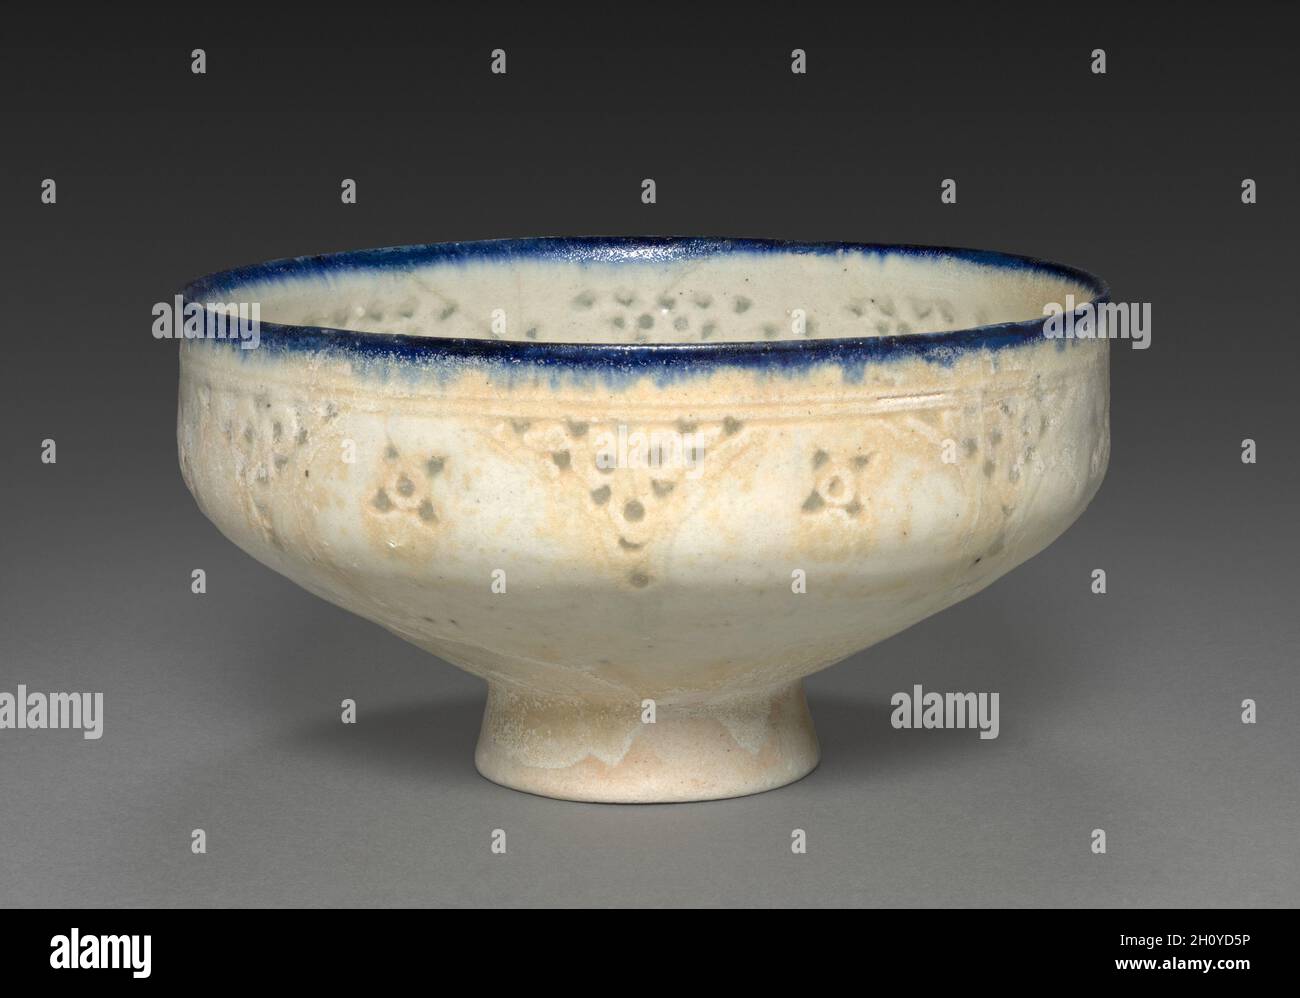 Footed Bowl, late 1100s-early 1200s. Iran, probably Kashan, Seljuq period, late 12-early 13th century. Fritware, pierced and underglaze painting; overall: 9.8 x 18.2 cm (3 7/8 x 7 3/16 in.).  Iranian potters created transparency by piercing and glazing frit-body walls. Here, triangles and rosettes decorate incised scallops beneath the blue rim. The footed shape is derived from Iranian metal bowls. Stock Photo